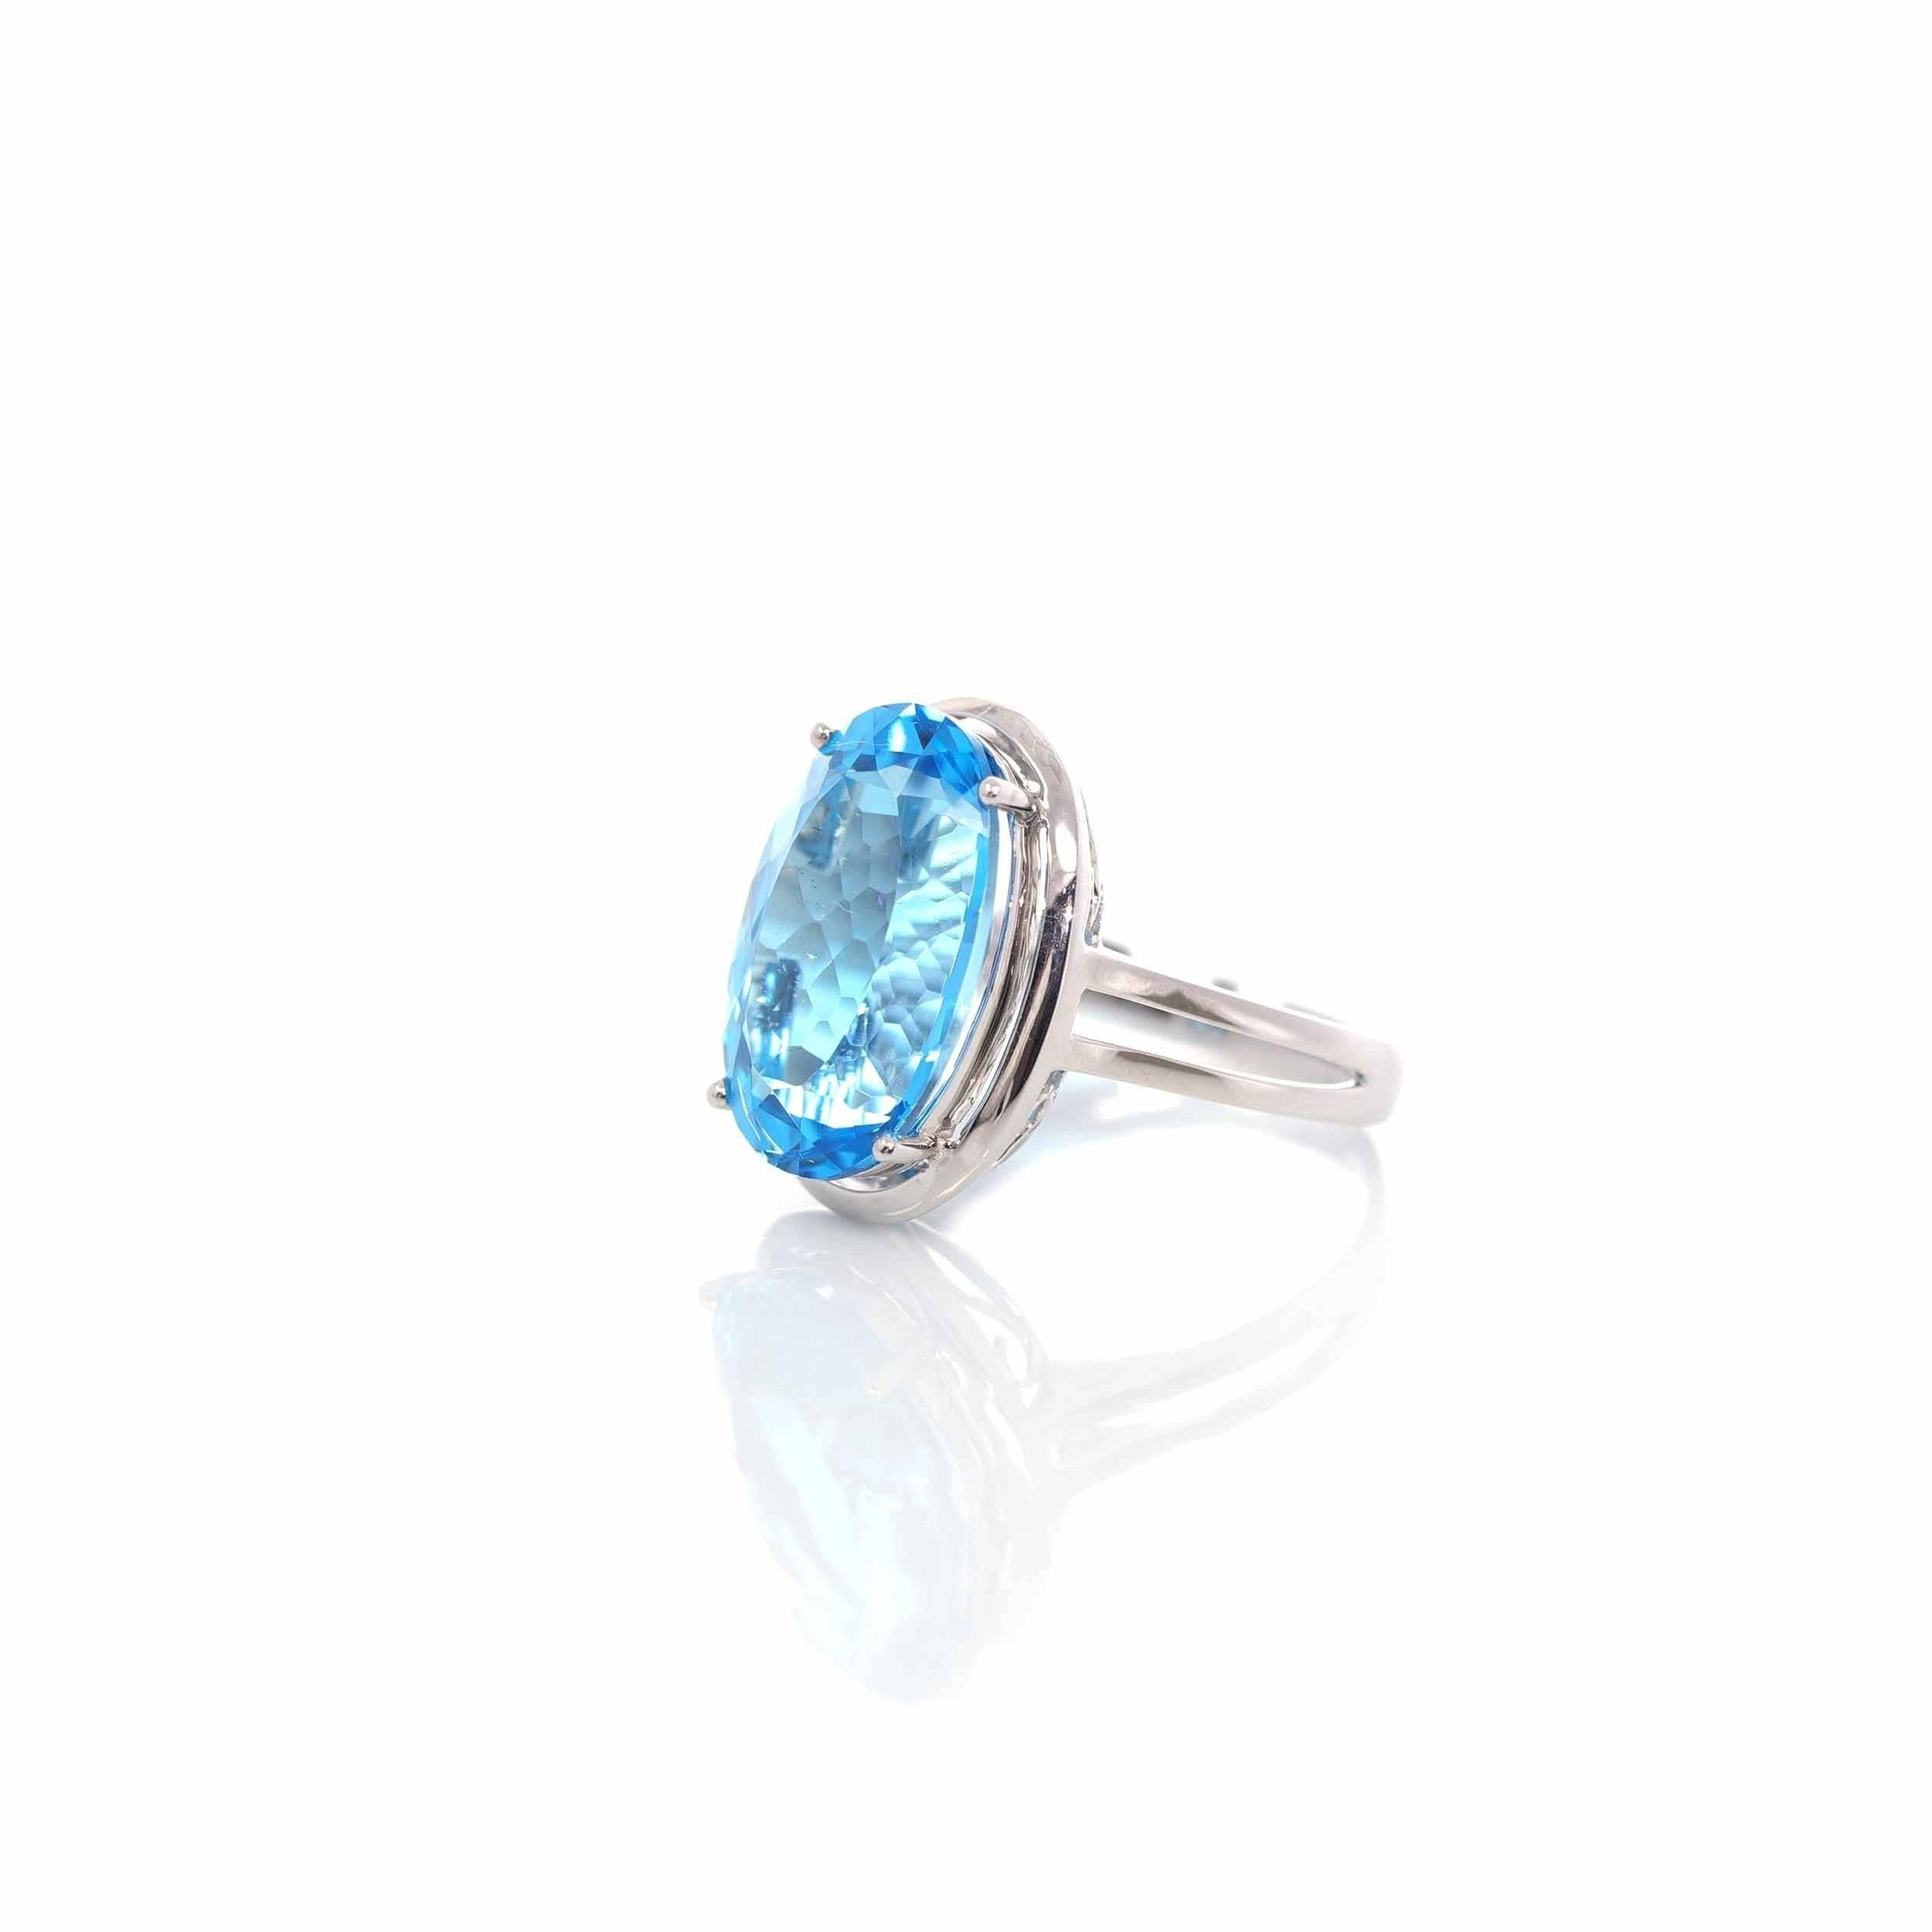 * Design Concept--- This ring features a Brazillian topaz 10.938 ct genuine swiss blue topaz. The design is simplistic yet elegant. The ring looks very exquisite with some diamonds halo. Baikalla artisans are dedicated to combining beautiful